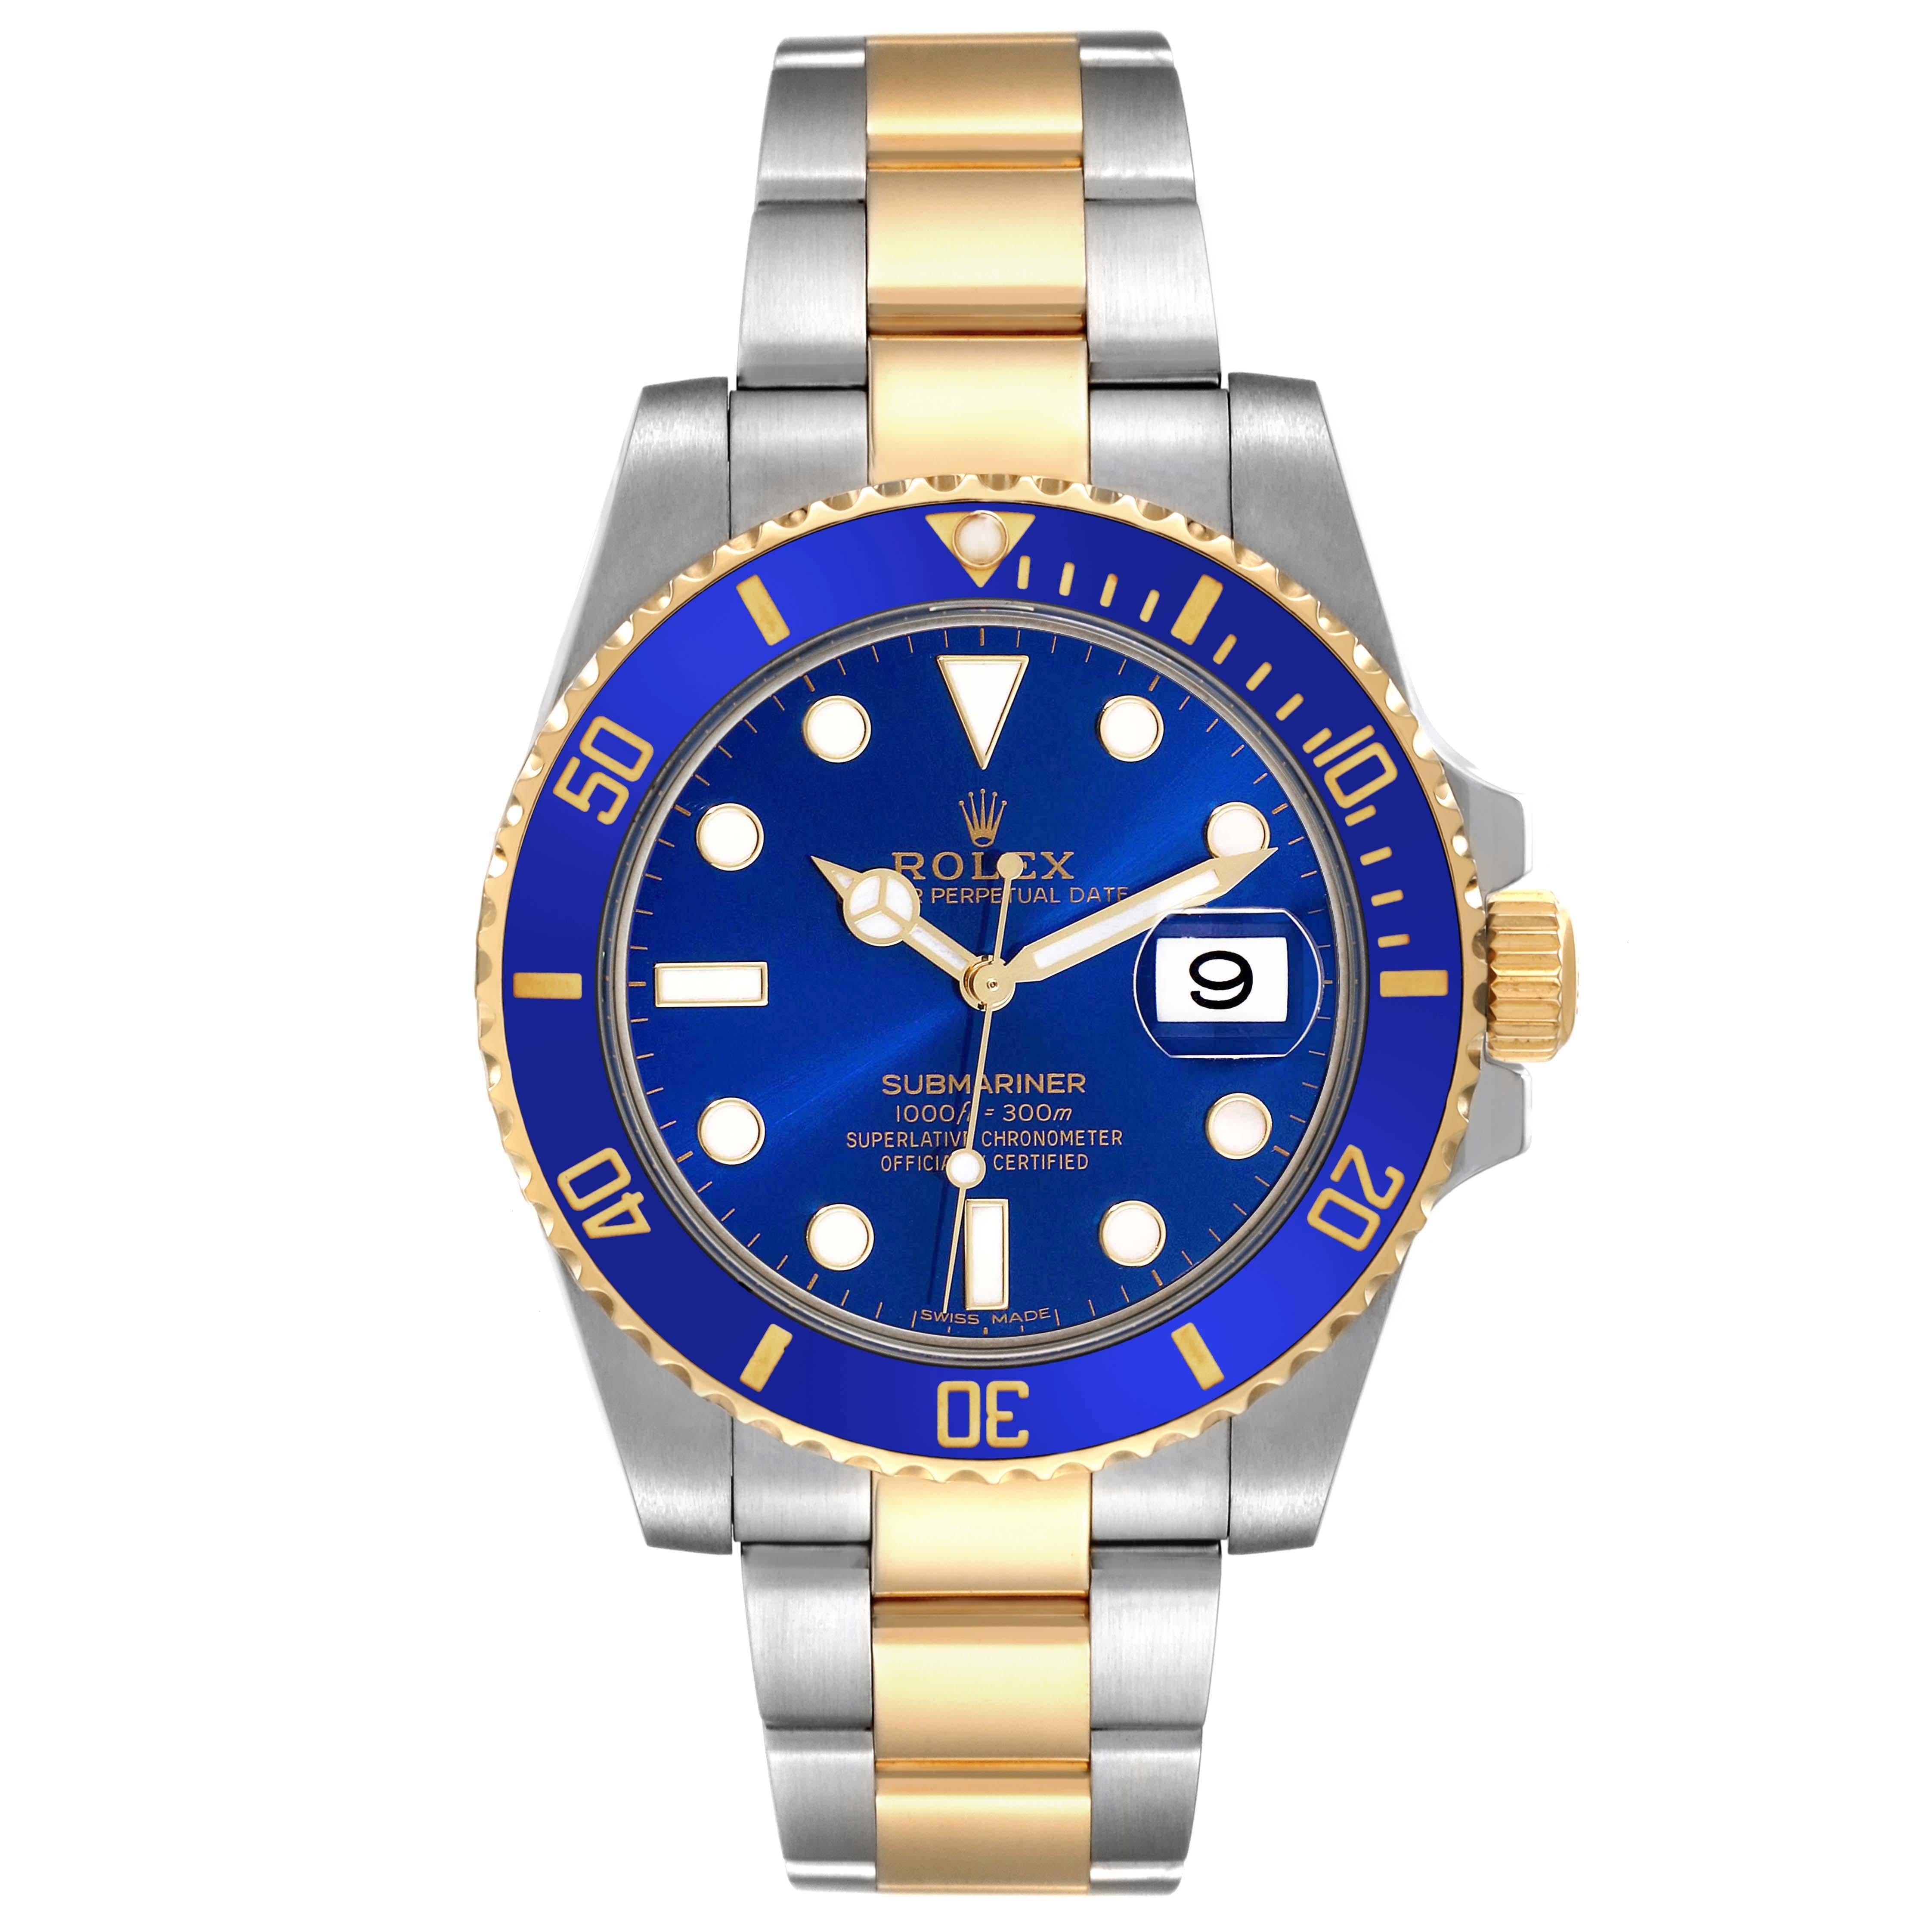 Rolex Submariner Steel Yellow Gold Blue Dial Mens Watch 116613. Officially certified chronometer self-winding movement. Stainless steel and 18k yellow gold case 40.0 mm in diameter. Rolex logo on a crown. Ceramic blue Ion-plated special time-lapse